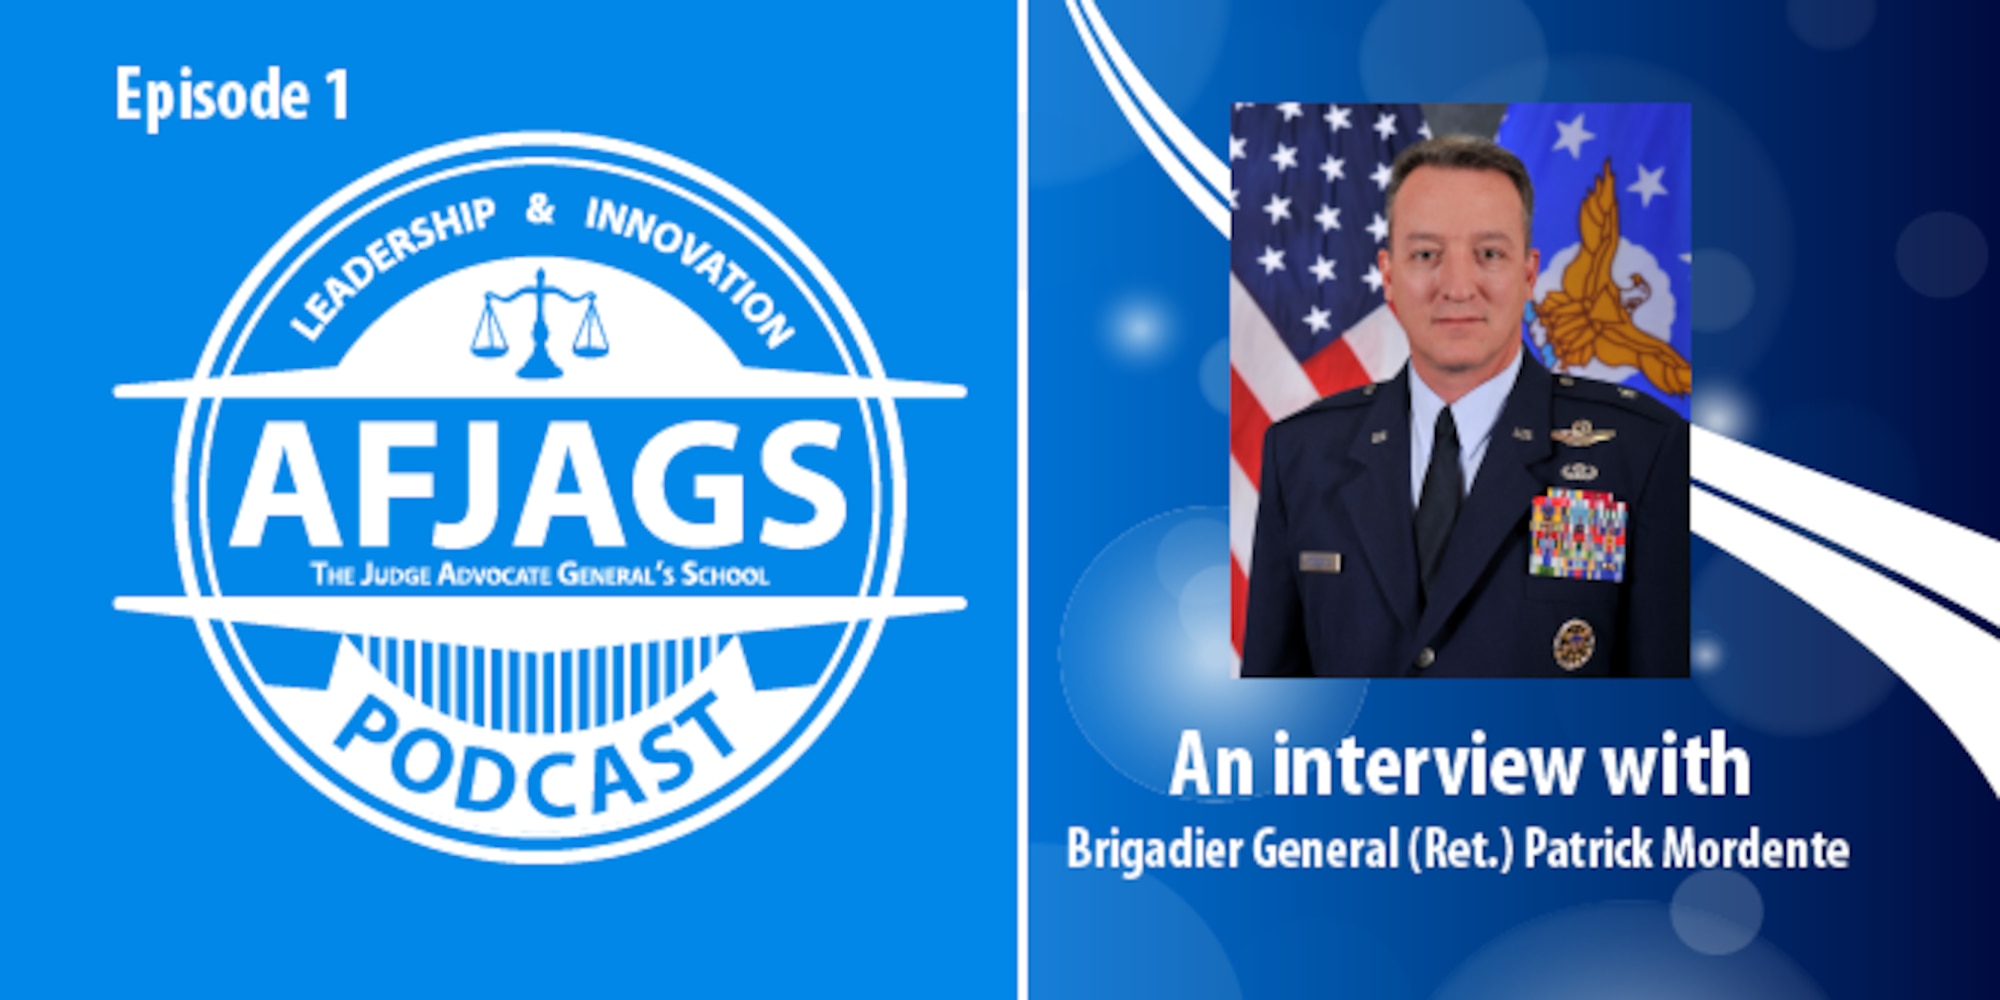 AFJAGS Podcast Episode 1, an interview with Brigadier General (Ret.) Patrick Mordente